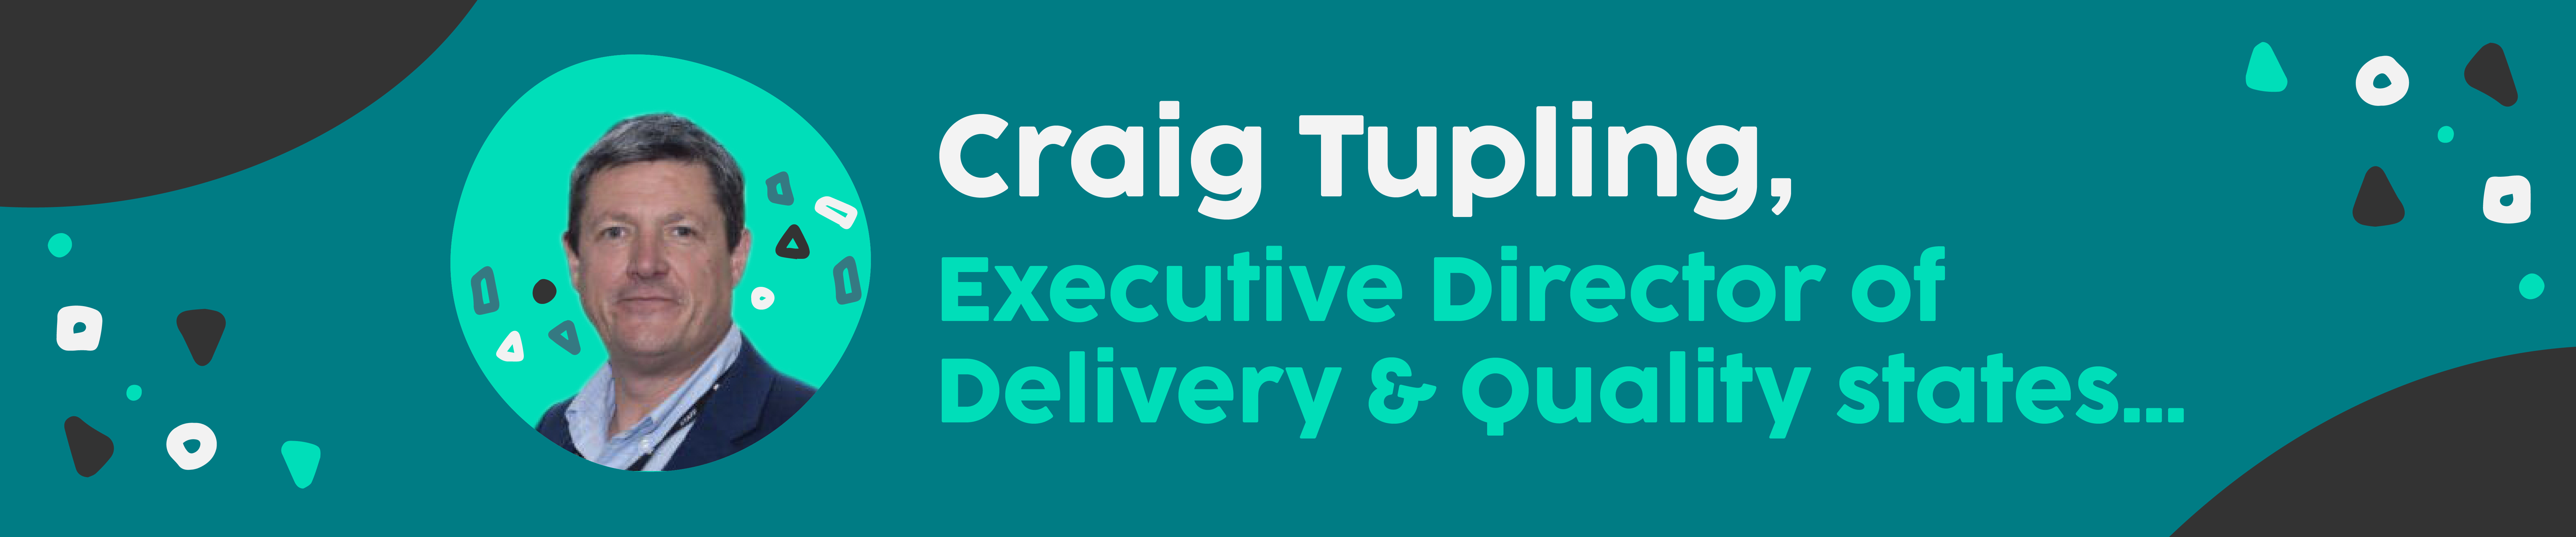 Craig Tupling - Executive Director of Delivery and Quality at The Skills Network